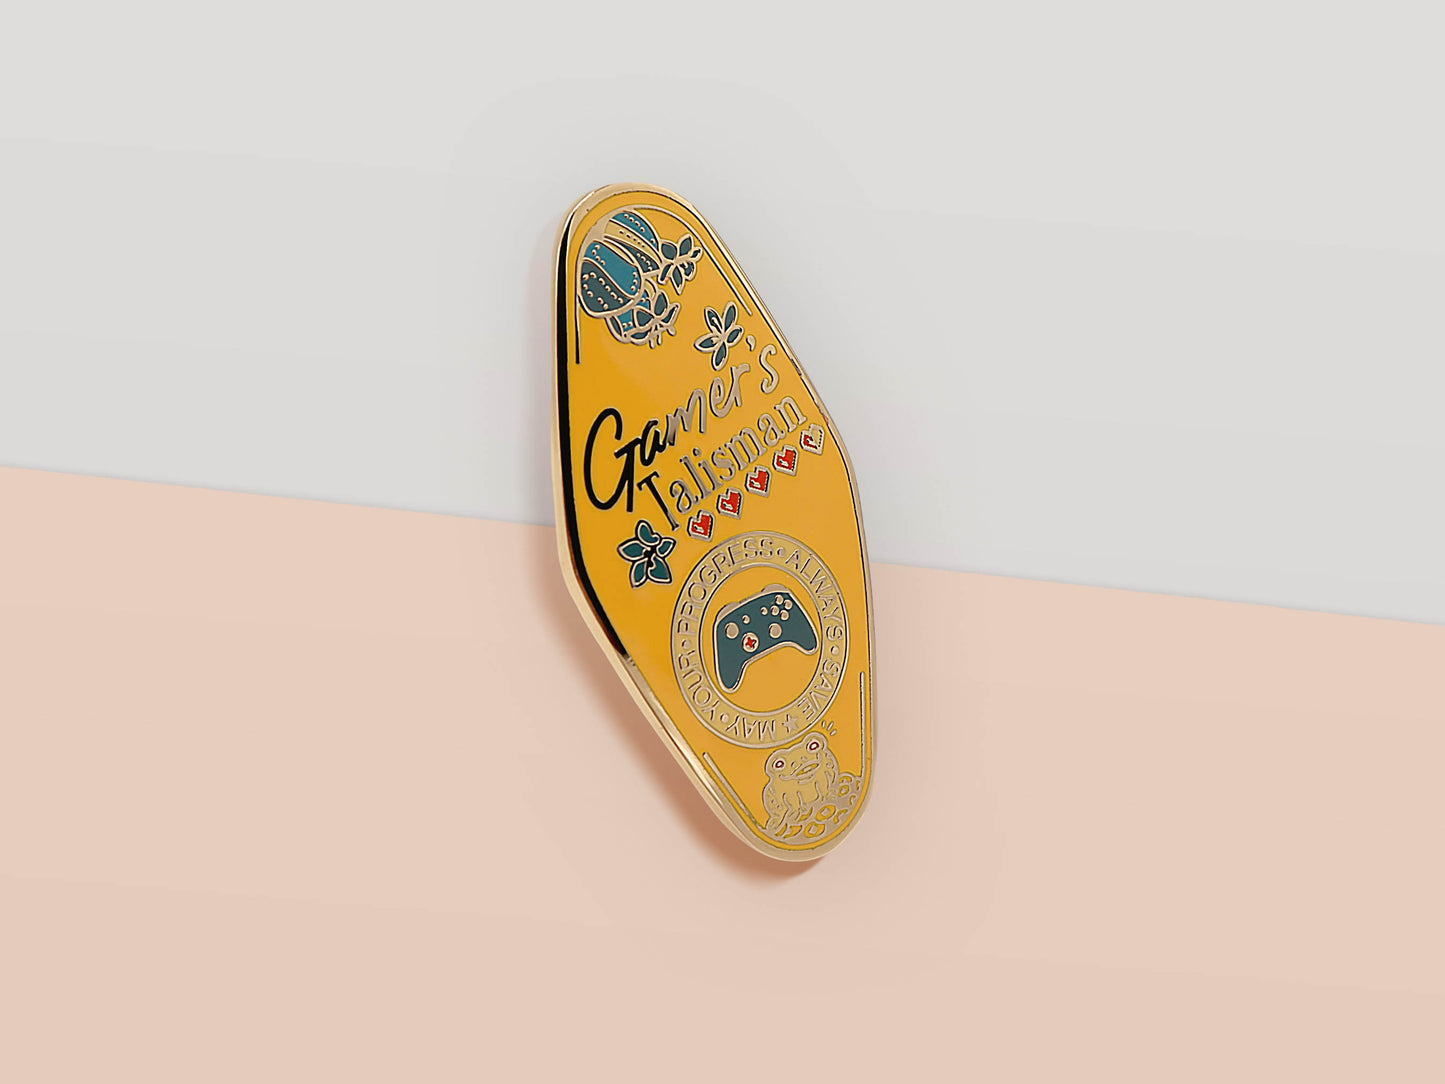 Gold Enamel Talisman Pin with yellow design and the words Gamer's Talisman, May Your Progress Always Save. The pins design includes a game console controller and health hearts, A jin Chan money toad, as well as plants and crystals.